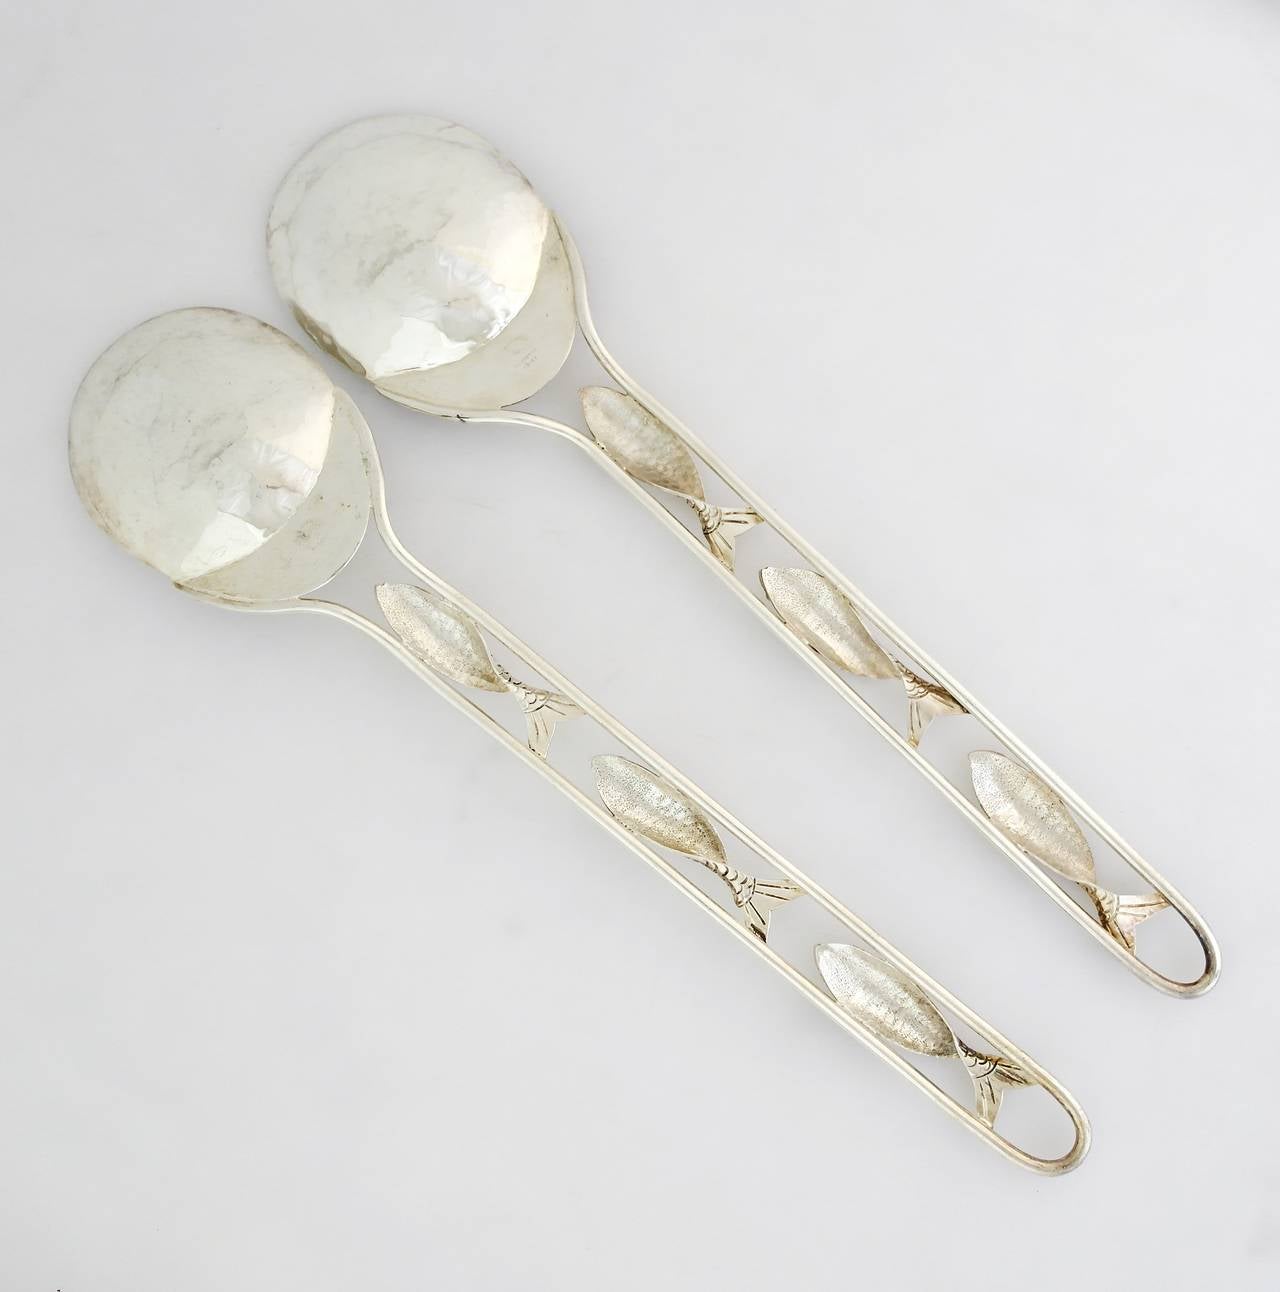 Important Emilia Castillo Silver Plate Hand-Wrought Serving Spoons, 1990 1